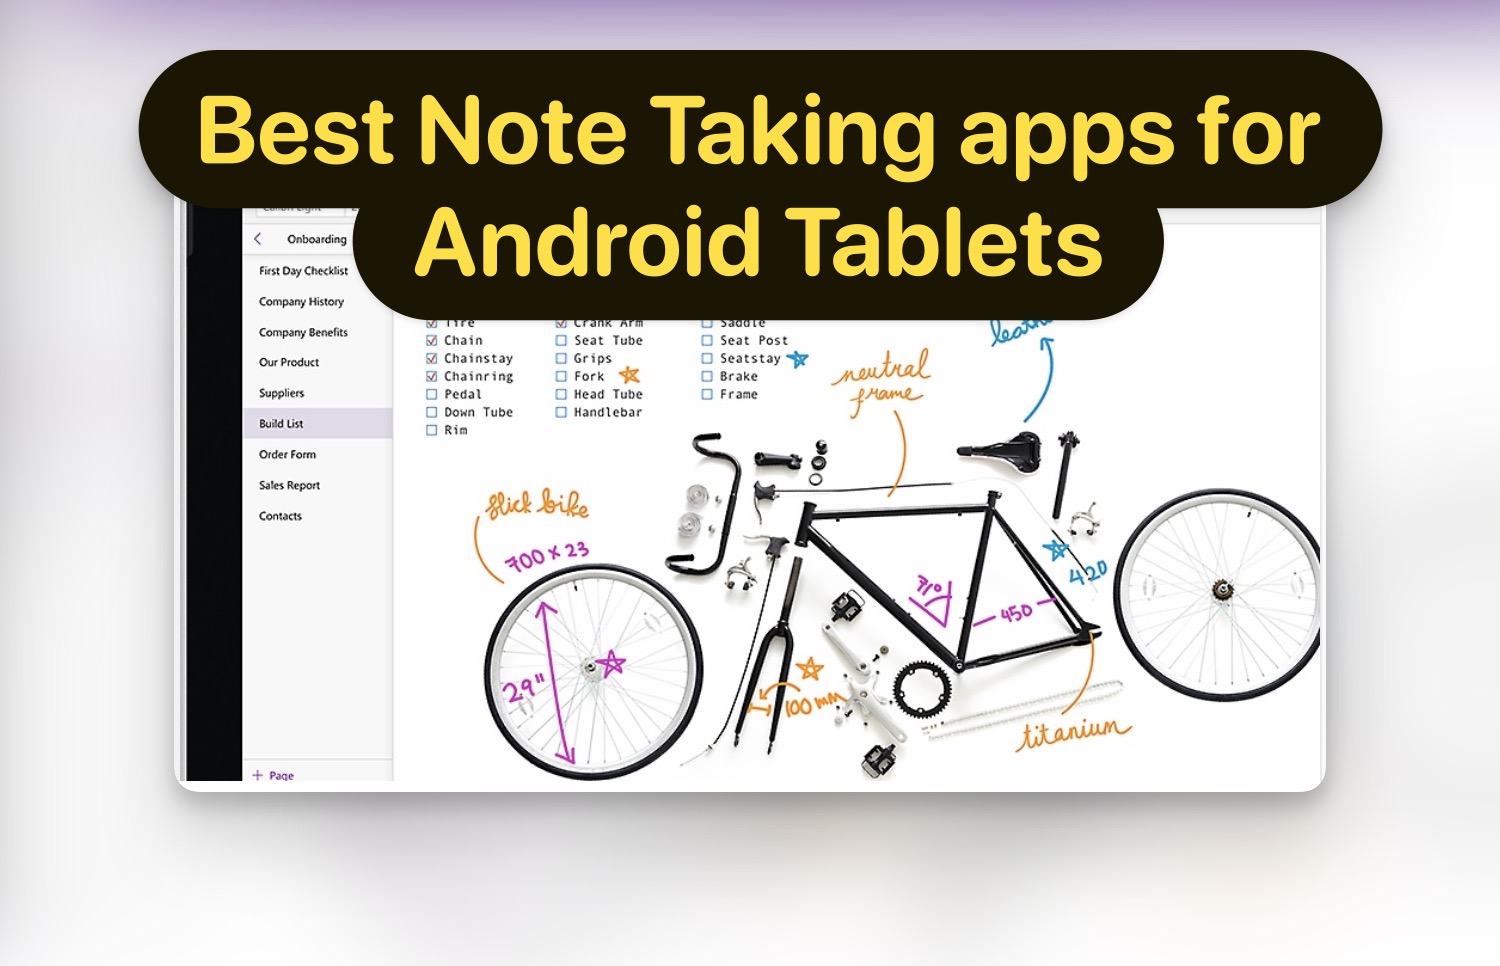 Best Note-Taking apps for Samsung Galaxy and Pixel Devices (Android tablets)